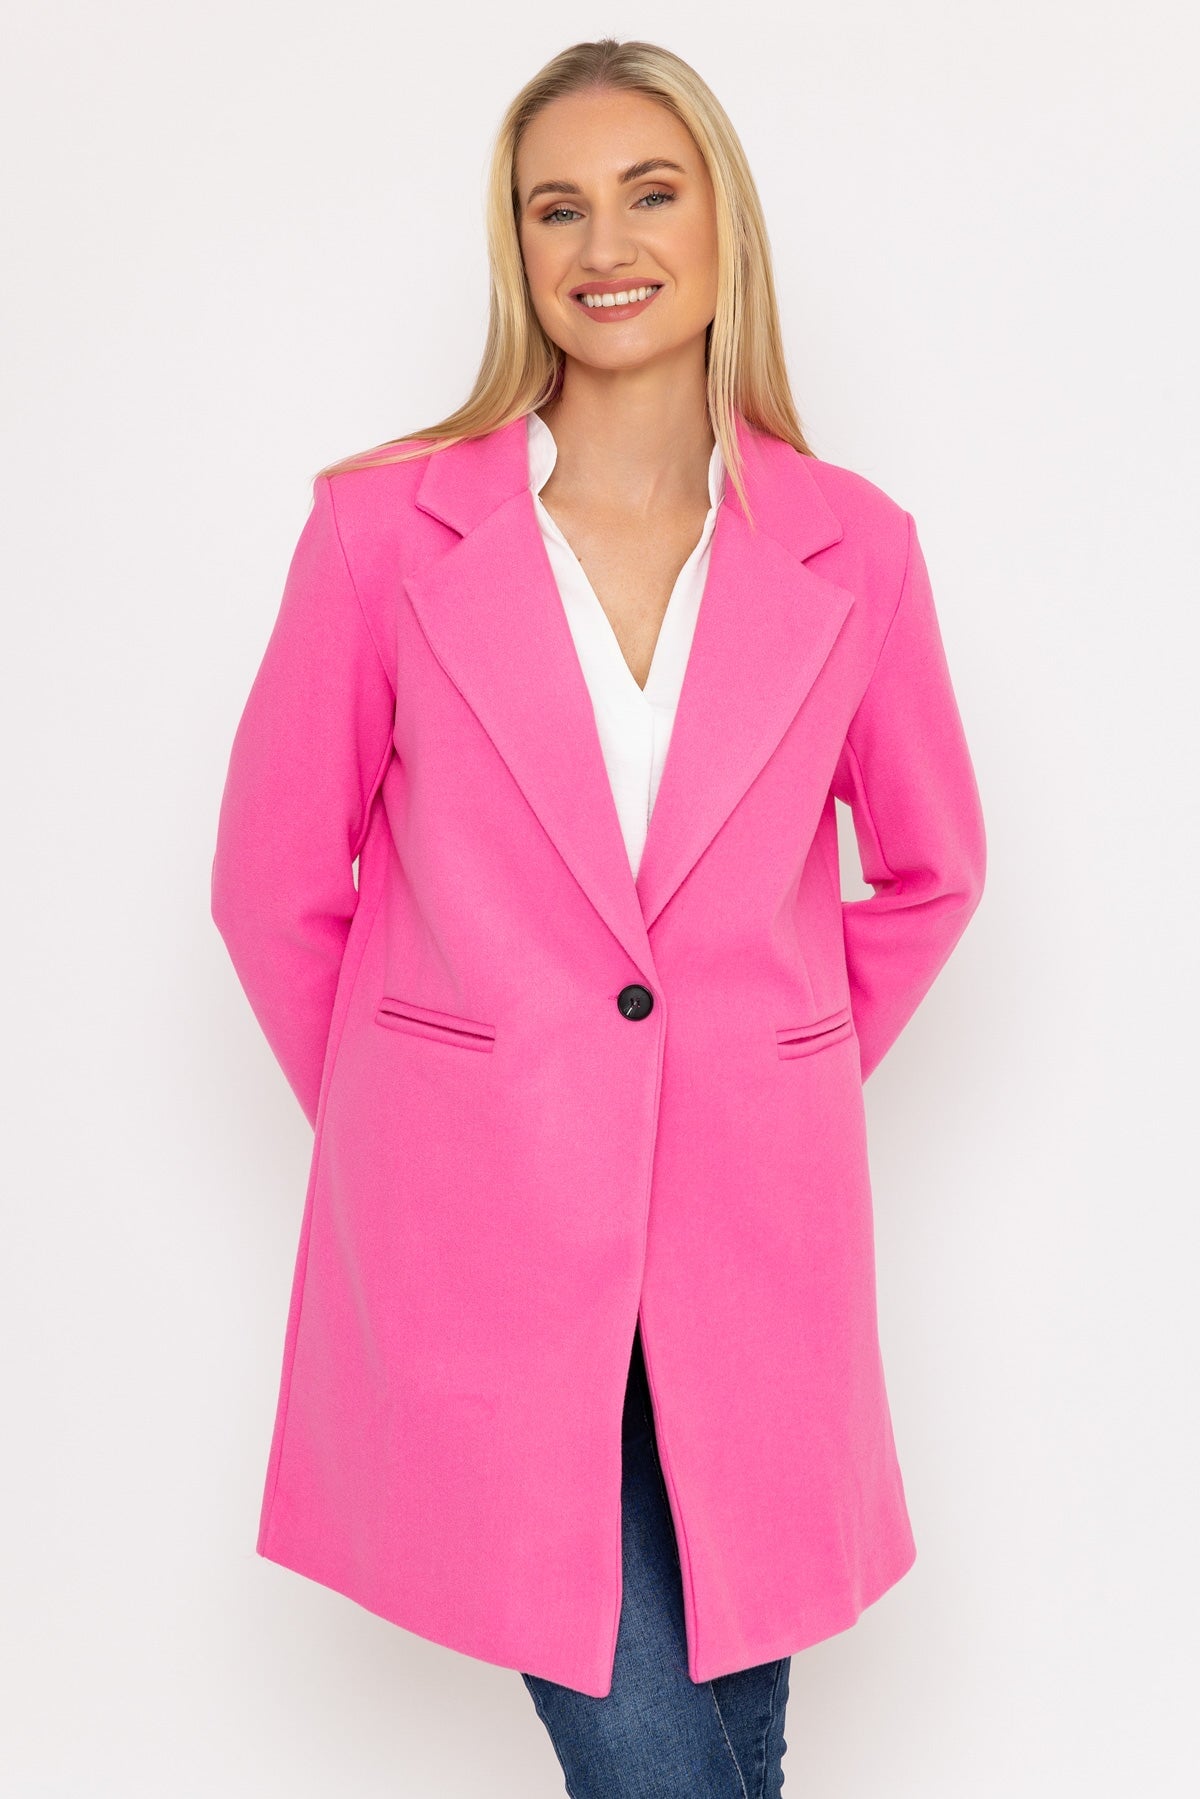 One Button Coat in Pink | Coats | Carraig Donn